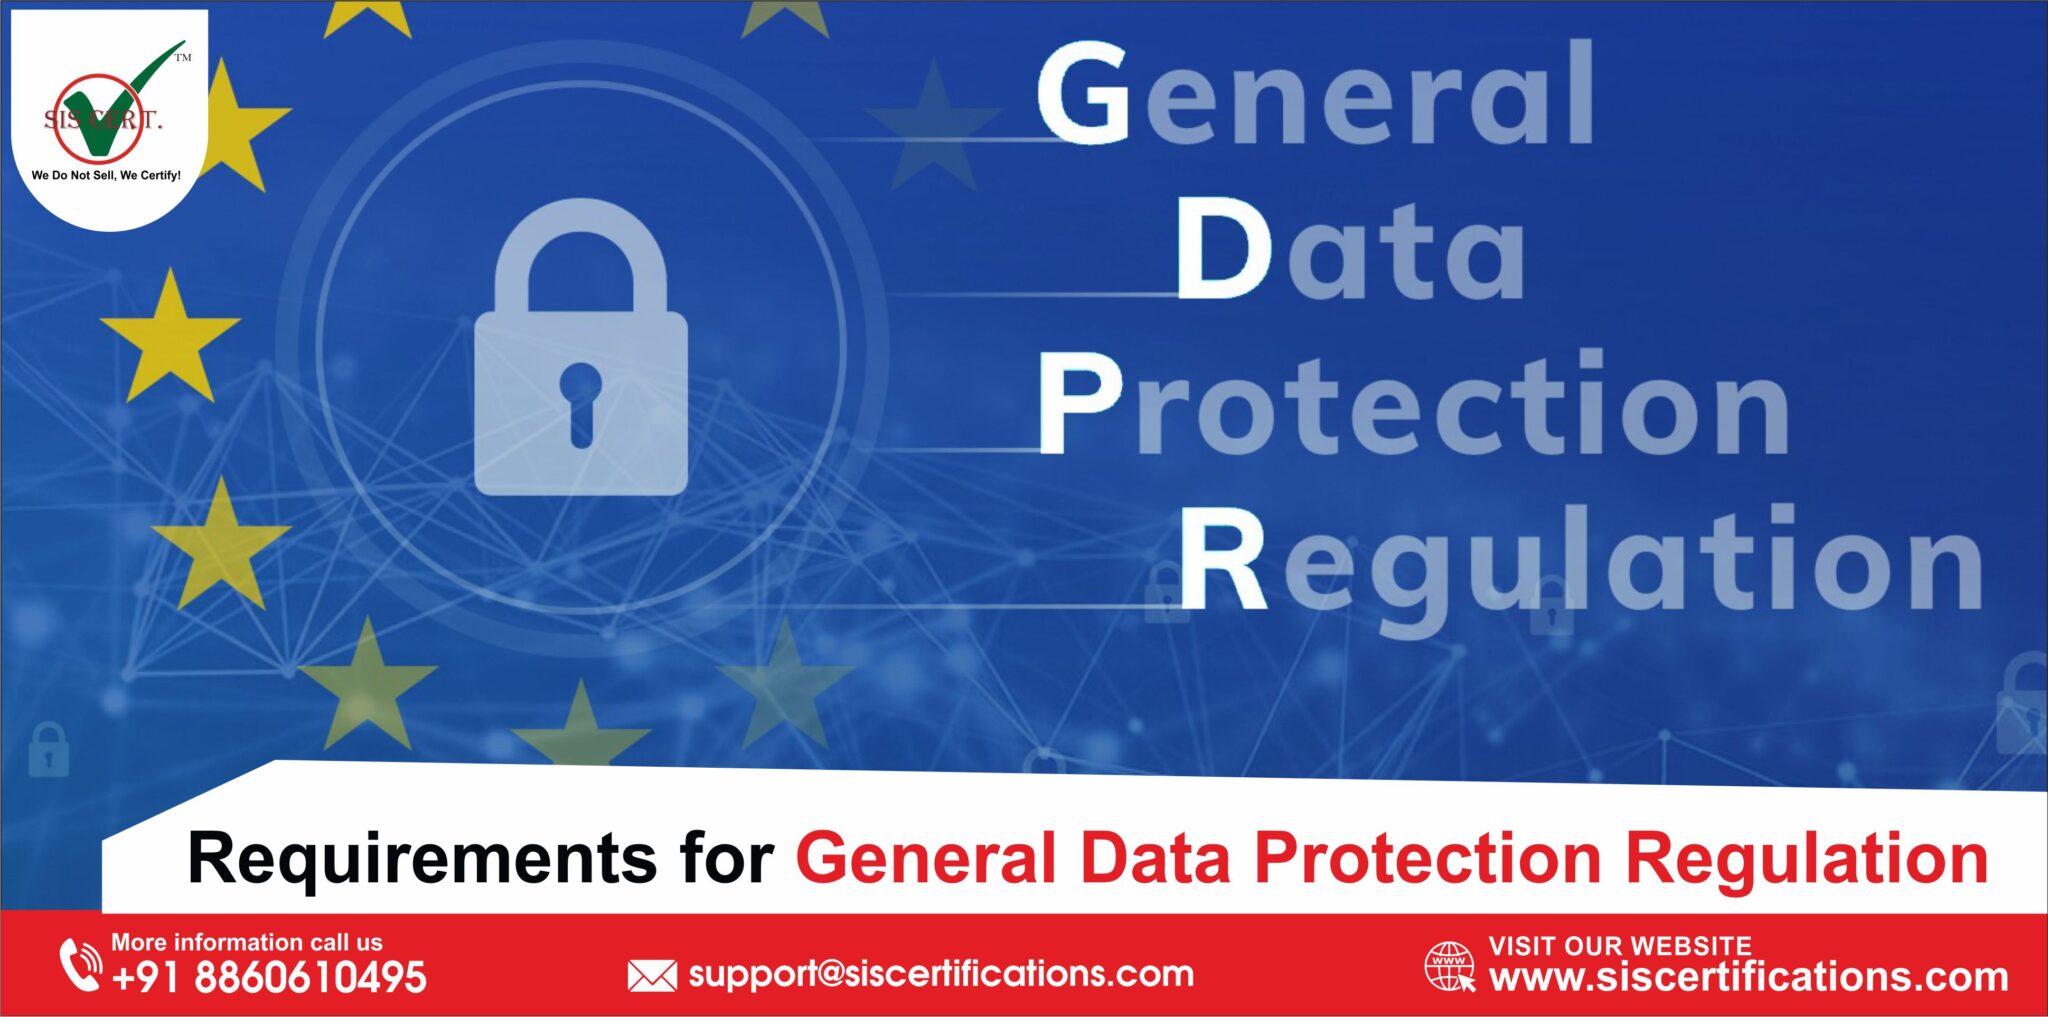 Requirements for General Data Protection Regulation